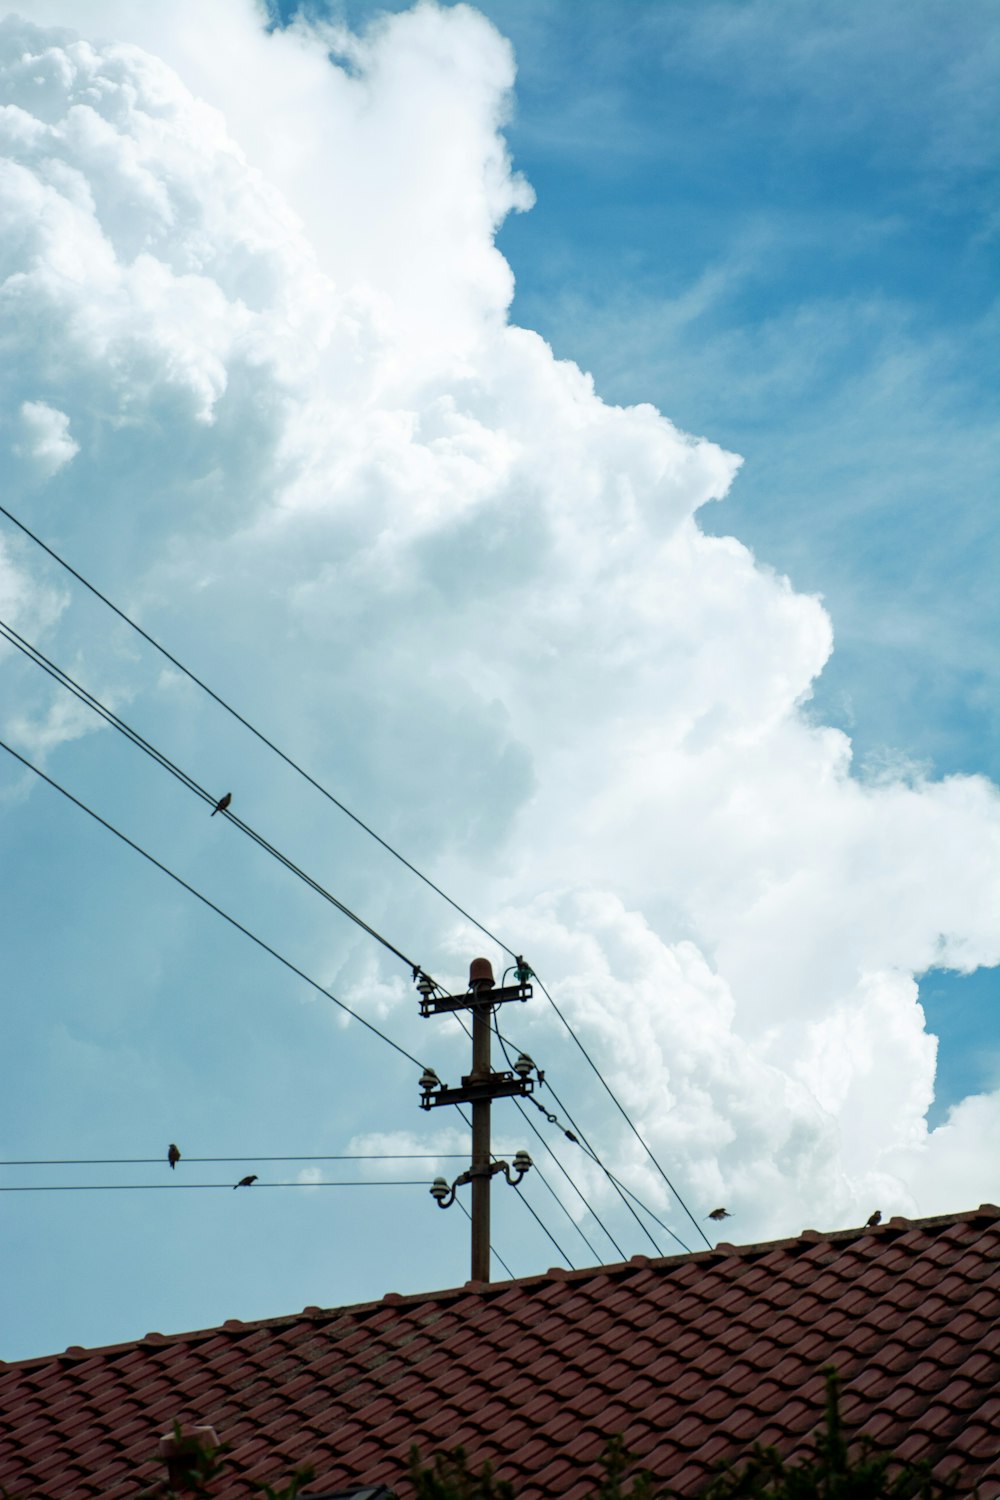 a view of a sky with clouds and power lines